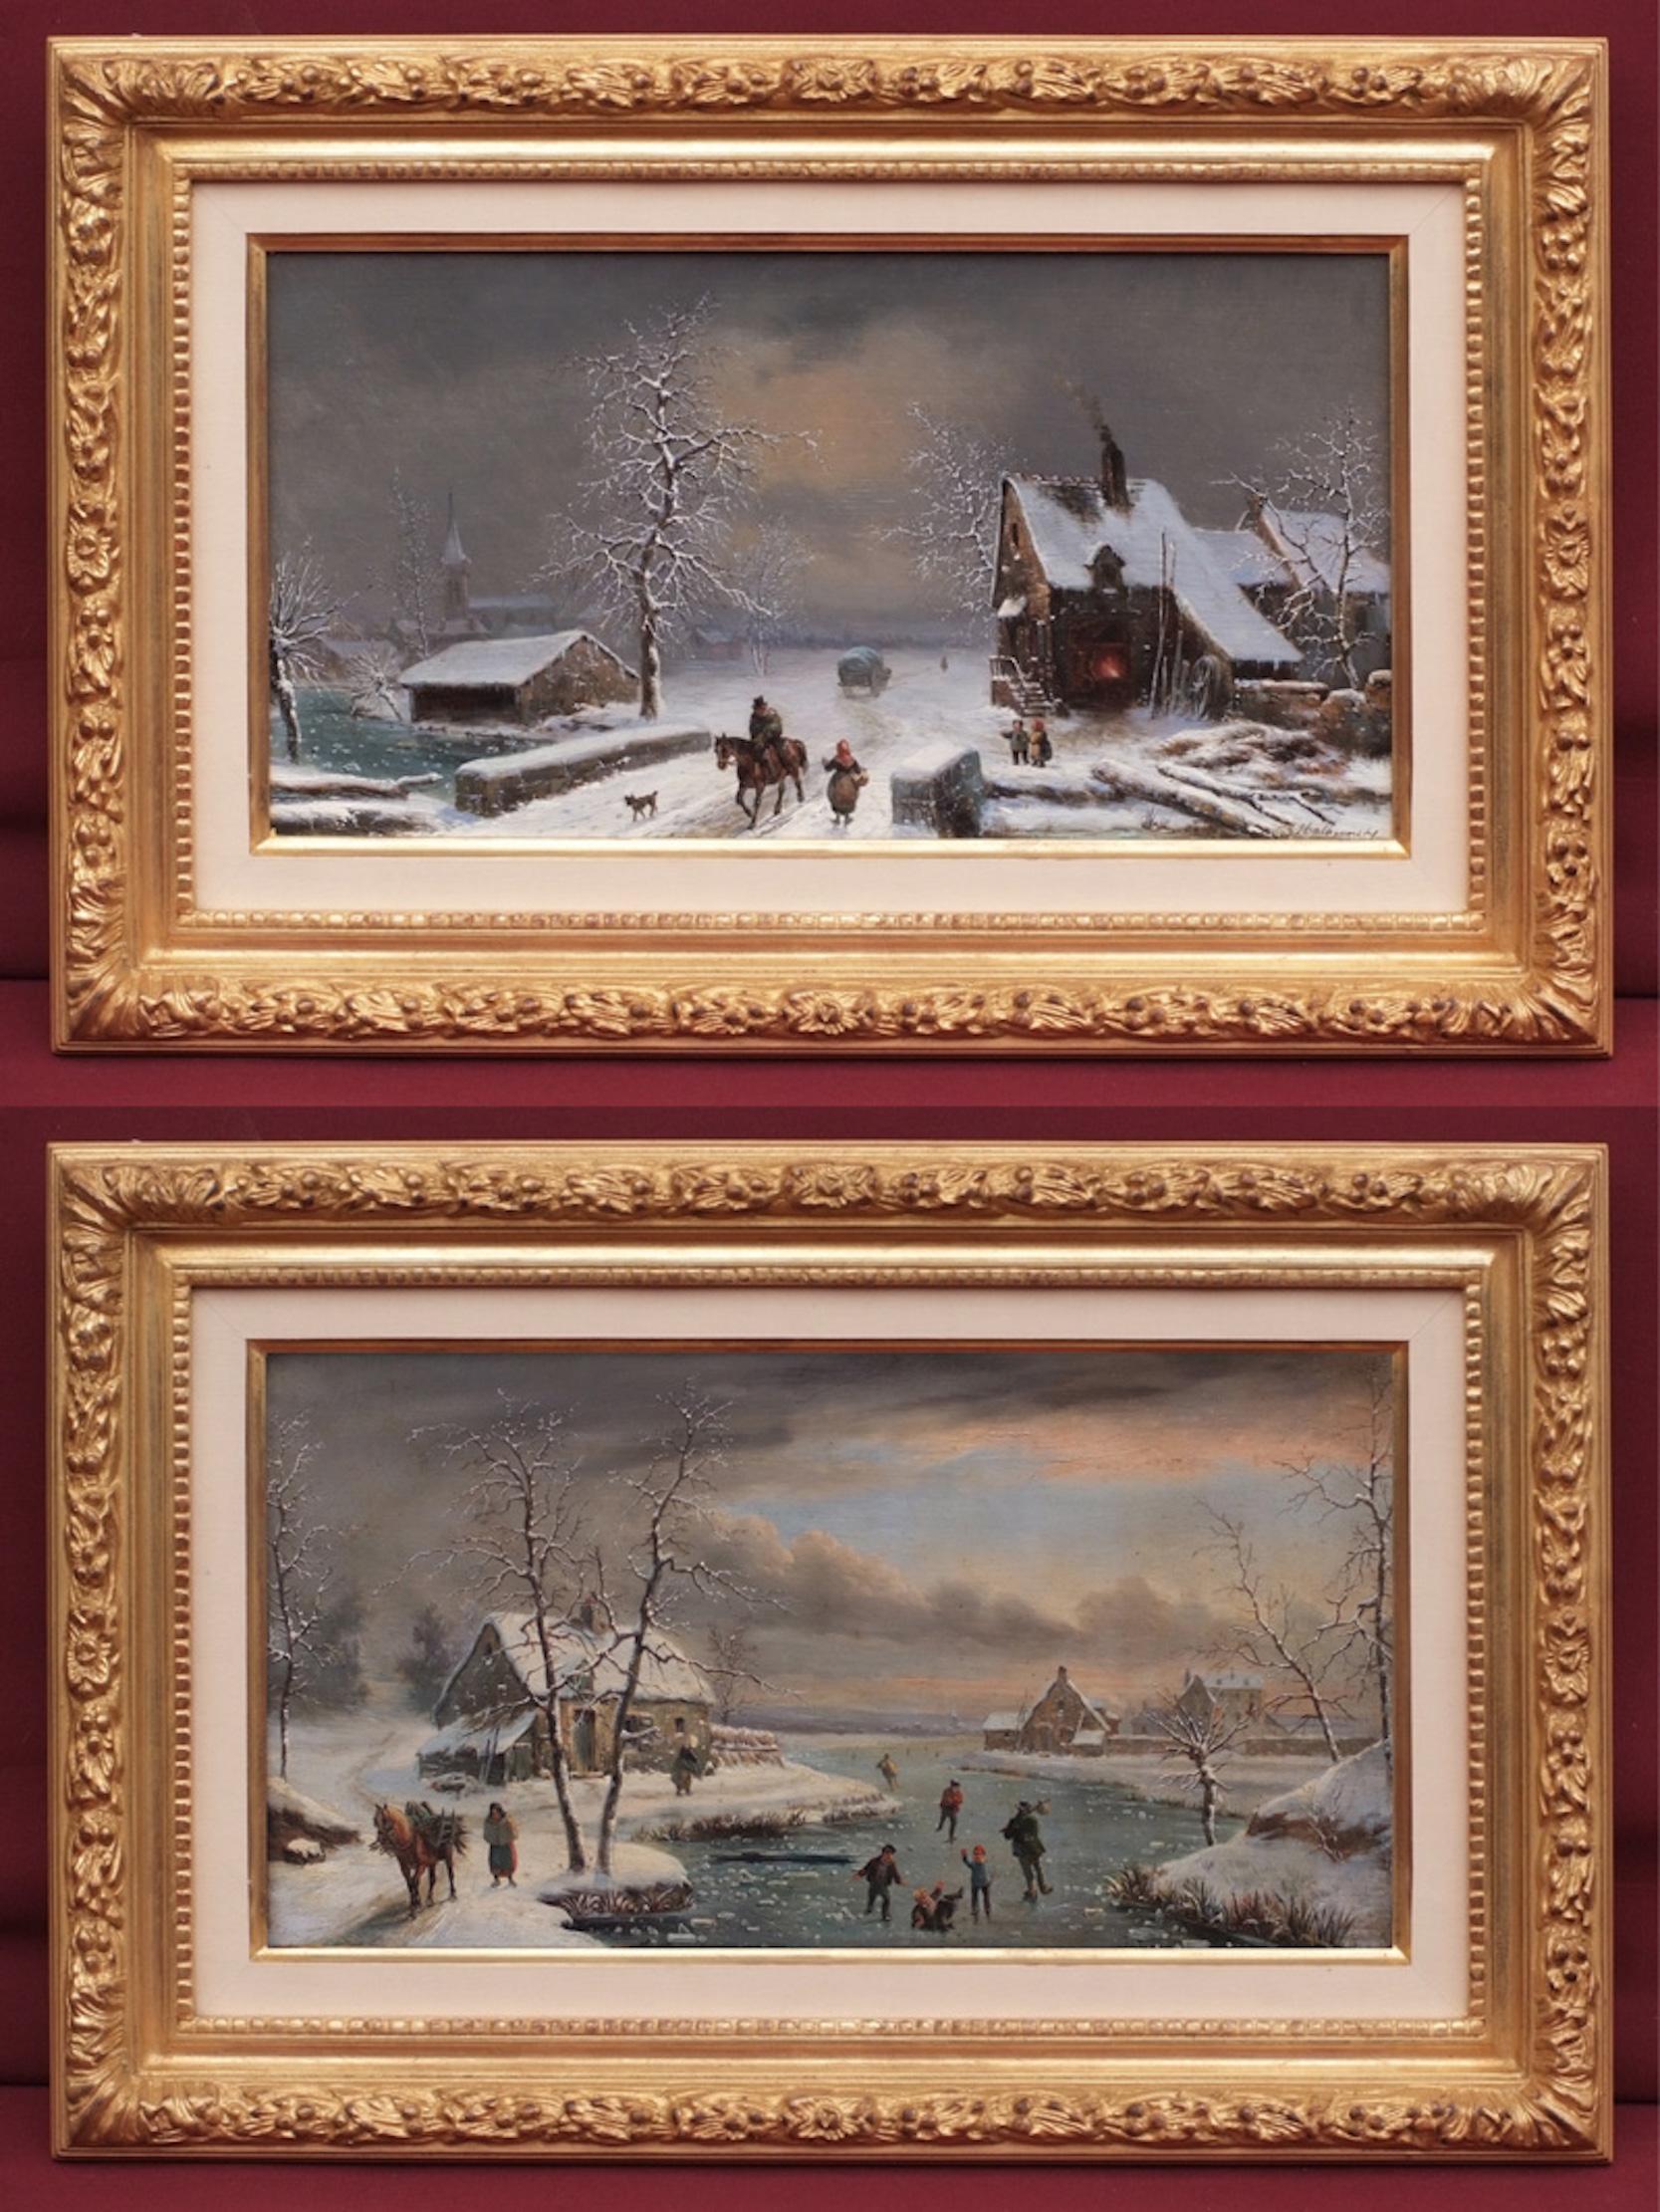 MALLEBRANCHE Louis Claude   Landscape Painting - Two paintings 19th century Lively Winter landscapes in pair